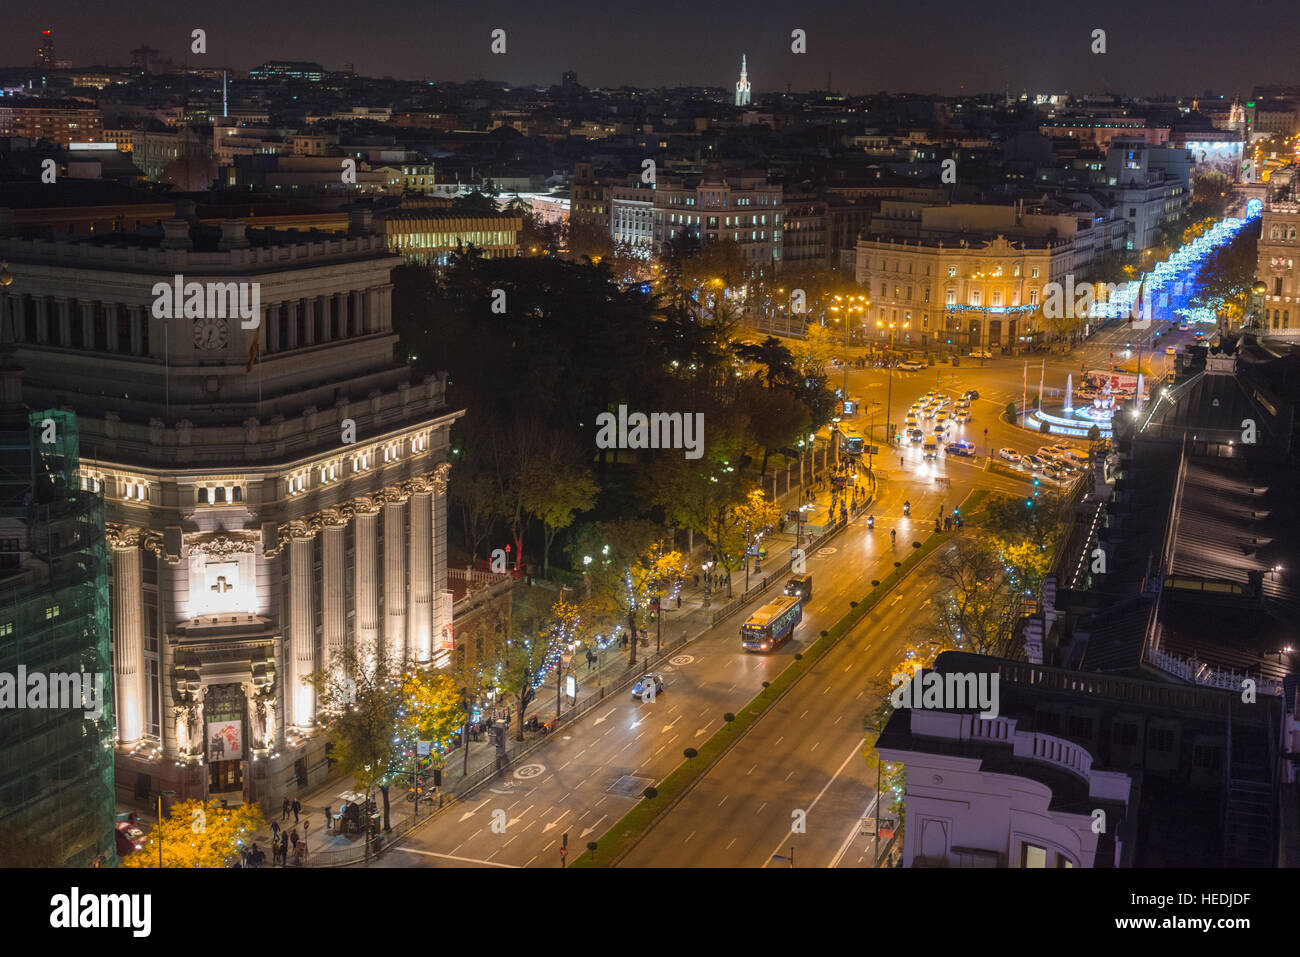 Aerial View And Skyline Of Madrid At Dusk Spain Europe Stock Photo -  Download Image Now - iStock